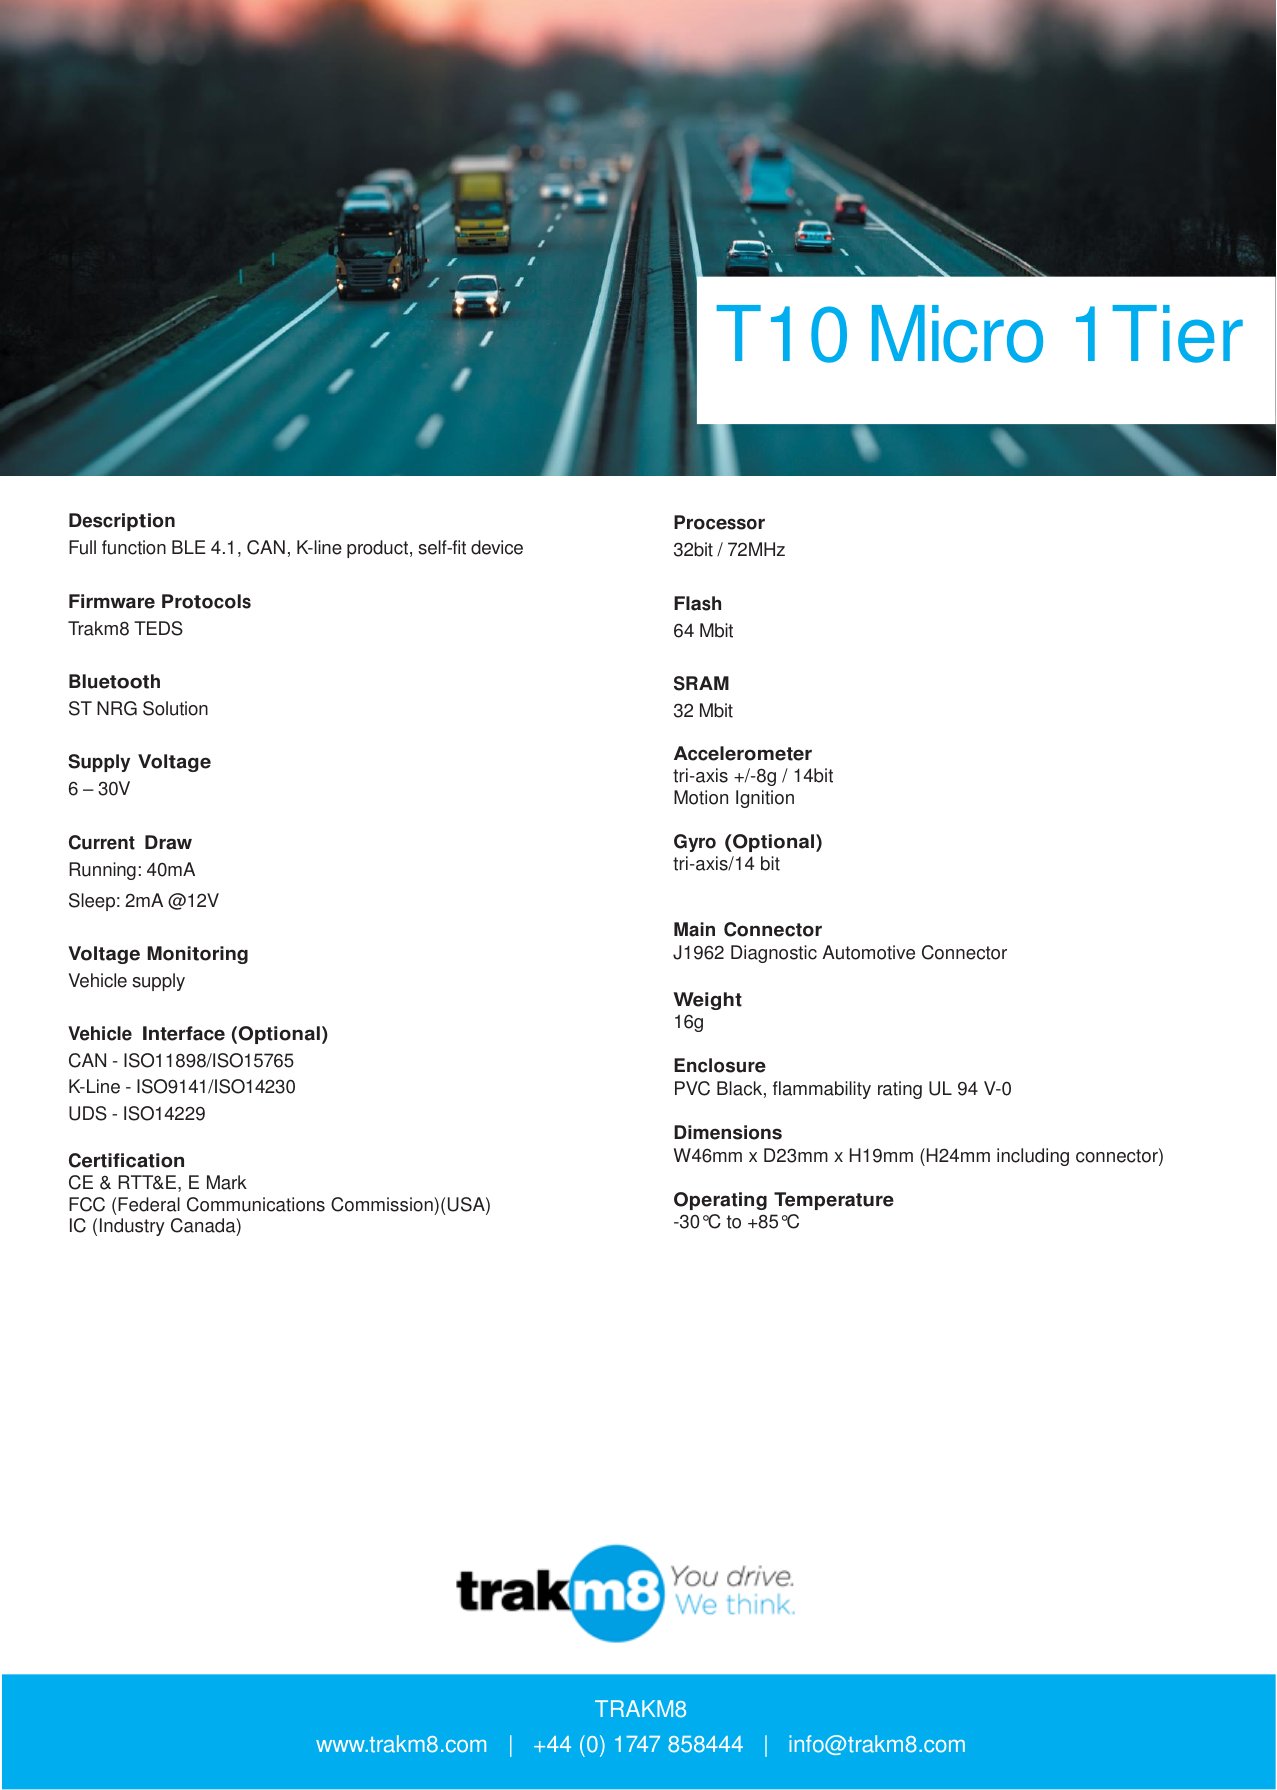 T10 Micro 1Tier    Description Full function BLE 4.1, CAN, K-line product, self-fit device   Firmware Protocols Trakm8 TEDS   Bluetooth ST NRG Solution   Supply Voltage 6 – 30V   Current Draw Running: 40mA Sleep: 2mA @12V  Voltage Monitoring Vehicle supply   Vehicle Interface (Optional) CAN - ISO11898/ISO15765 K-Line - ISO9141/ISO14230 UDS - ISO14229  Certification CE &amp; RTT&amp;E, E Mark FCC (Federal Communications Commission)(USA) IC (Industry Canada)        Processor 32bit / 72MHz   Flash 64 Mbit   SRAM 32 Mbit  Accelerometer tri-axis +/-8g / 14bit Motion Ignition  Gyro (Optional) tri-axis/14 bit   Main Connector J1962 Diagnostic Automotive Connector  Weight 16g  Enclosure PVC Black, flammability rating UL 94 V-0  Dimensions W46mm x D23mm x H19mm (H24mm including connector)  Operating Temperature -30°C to +85°C                   TRAKM8 www.trakm8.com   |   +44 (0) 1747 858444   |   info@trakm8.com 